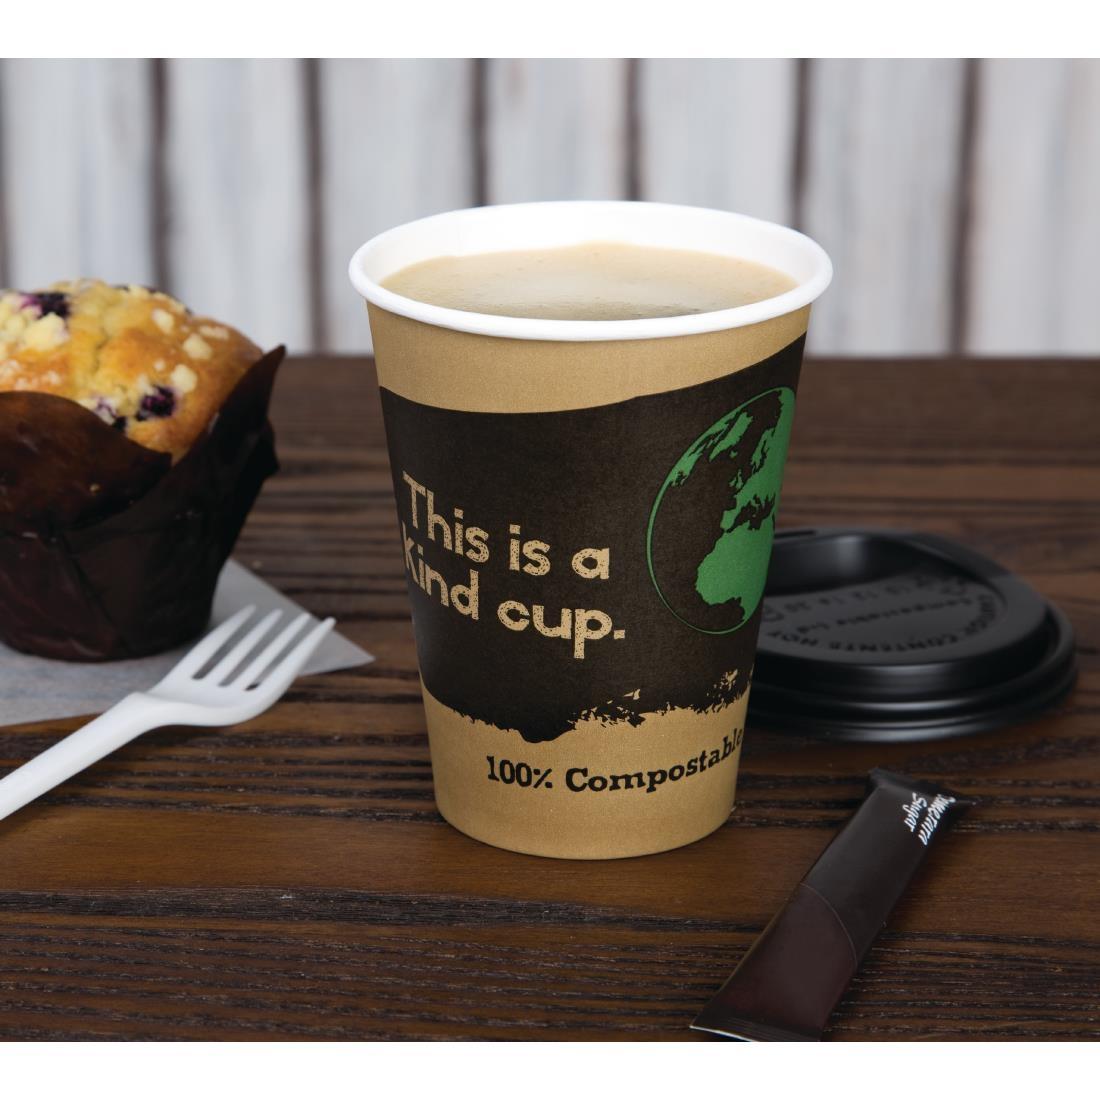 Fiesta Green 8oz Compostable Hot Cups and Lids Bundle (Pack of 1000) - SA484  - 5